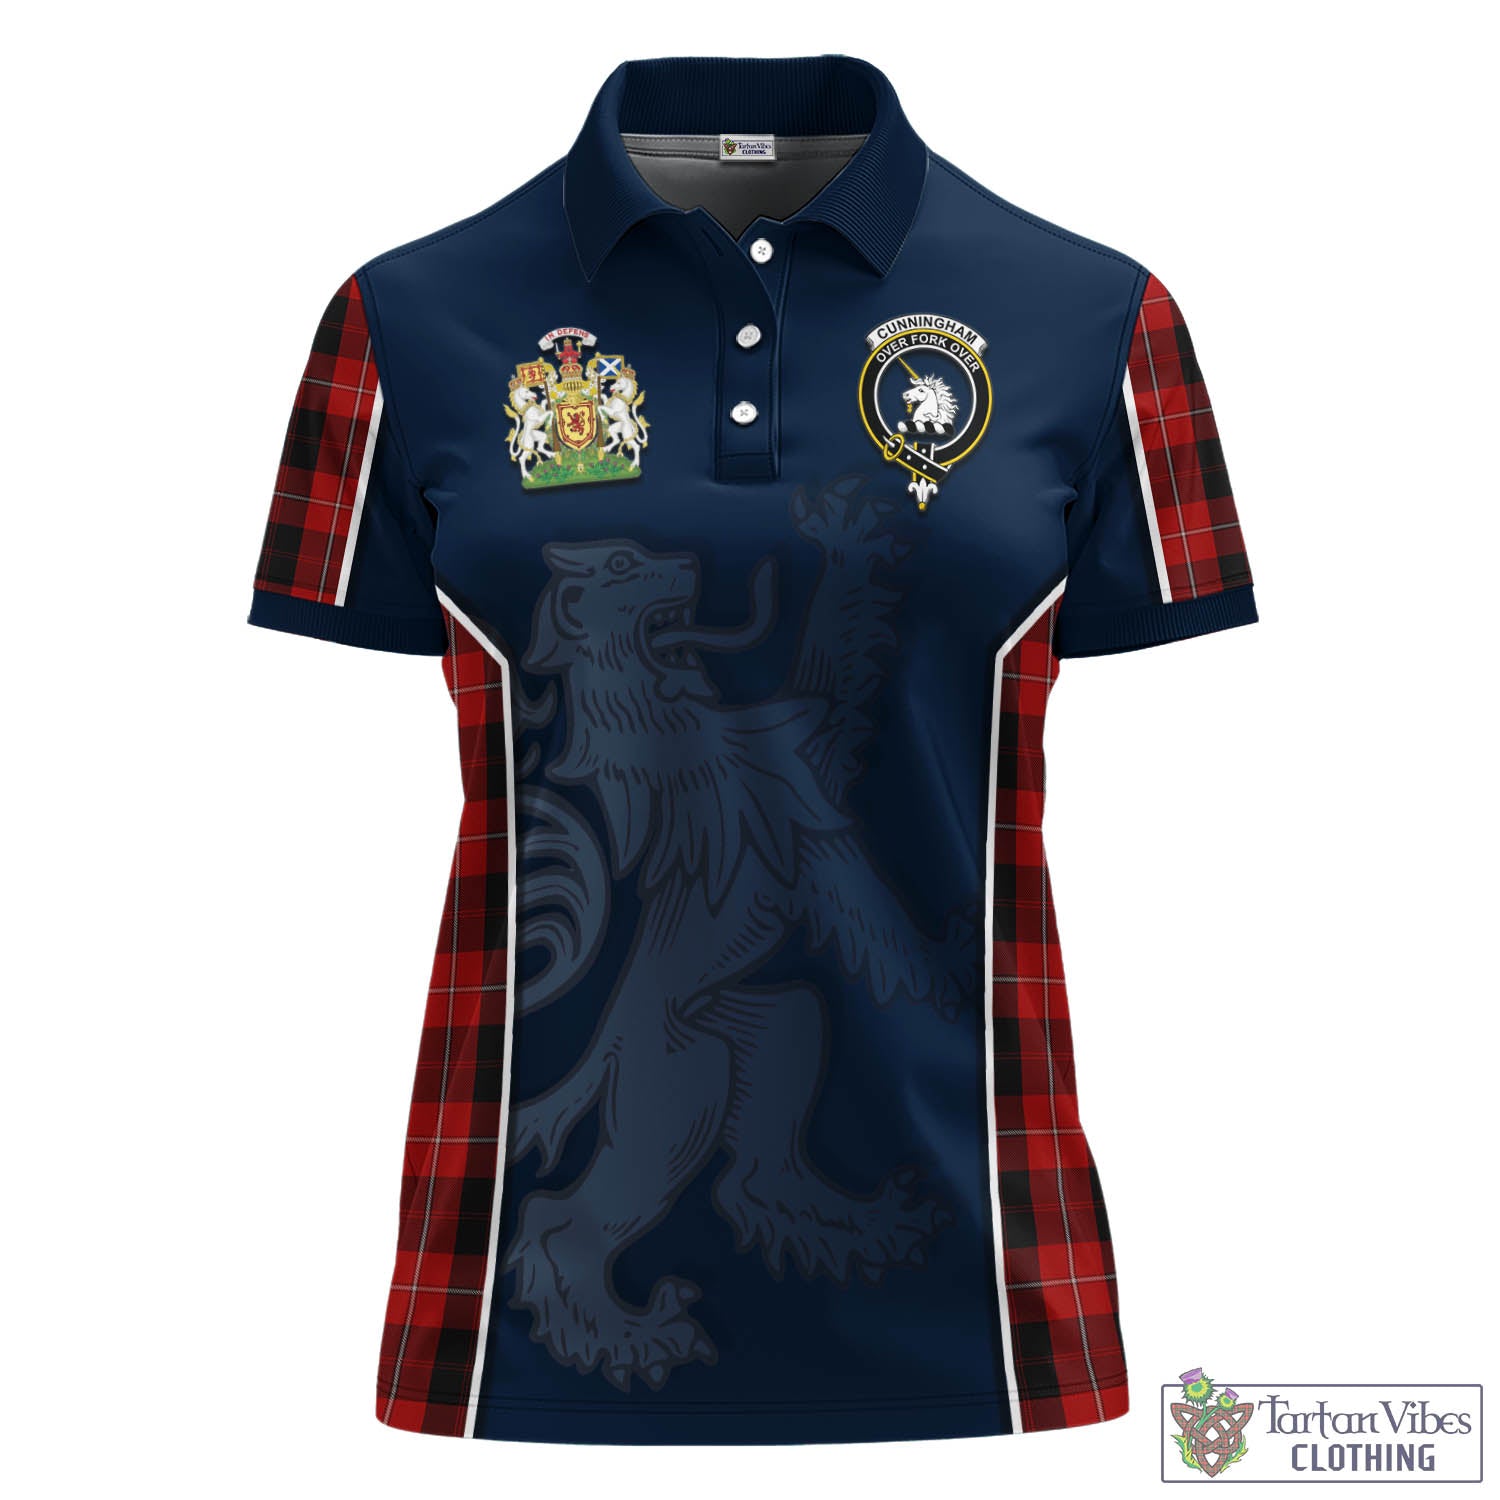 Tartan Vibes Clothing Cunningham Tartan Women's Polo Shirt with Family Crest and Lion Rampant Vibes Sport Style